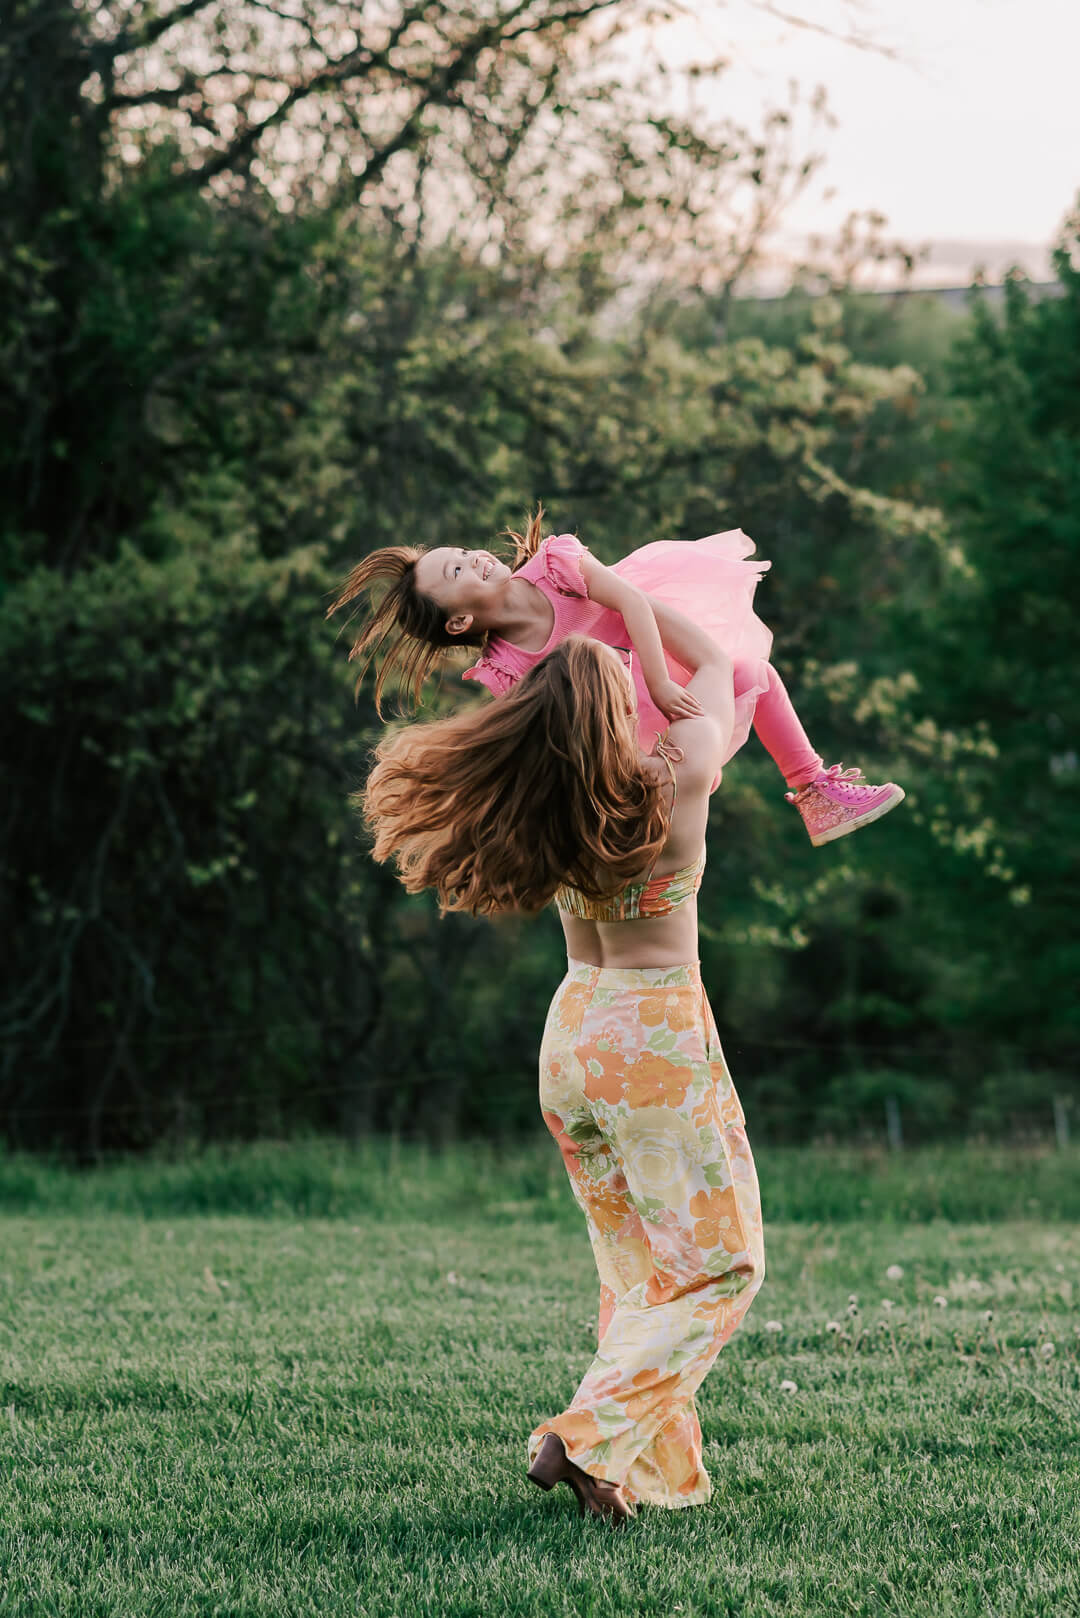 A mom in colorful pants lifts and spins with her toddler daughter in a pink dress in a field after some family therapy northern virginia